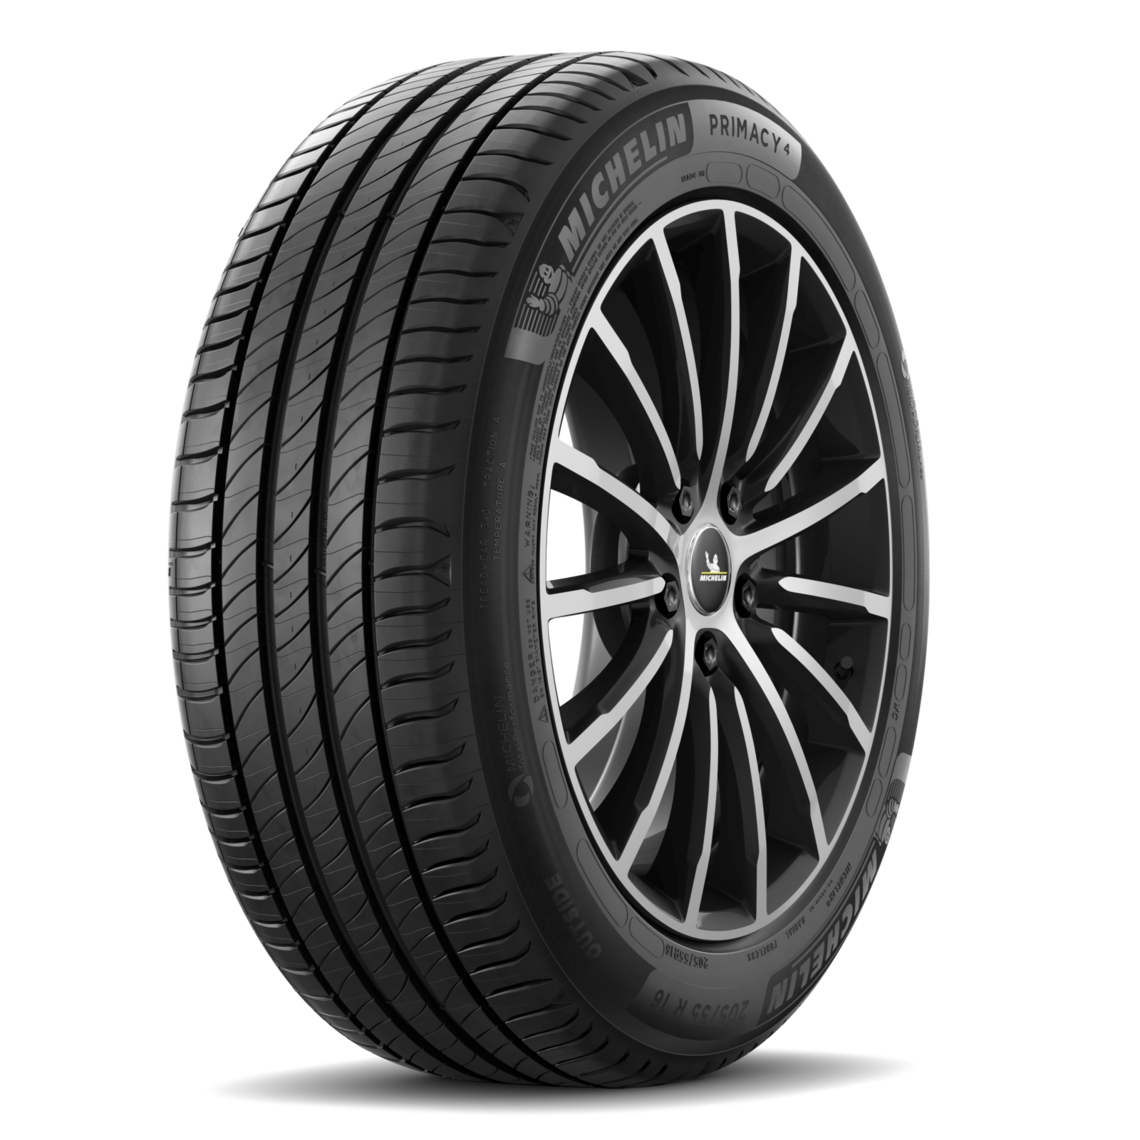 X4 185 65 15 TOYO PROXES COMFORT AMAZING CA RATED QUALITY TYRES 185/65R15  92H XL